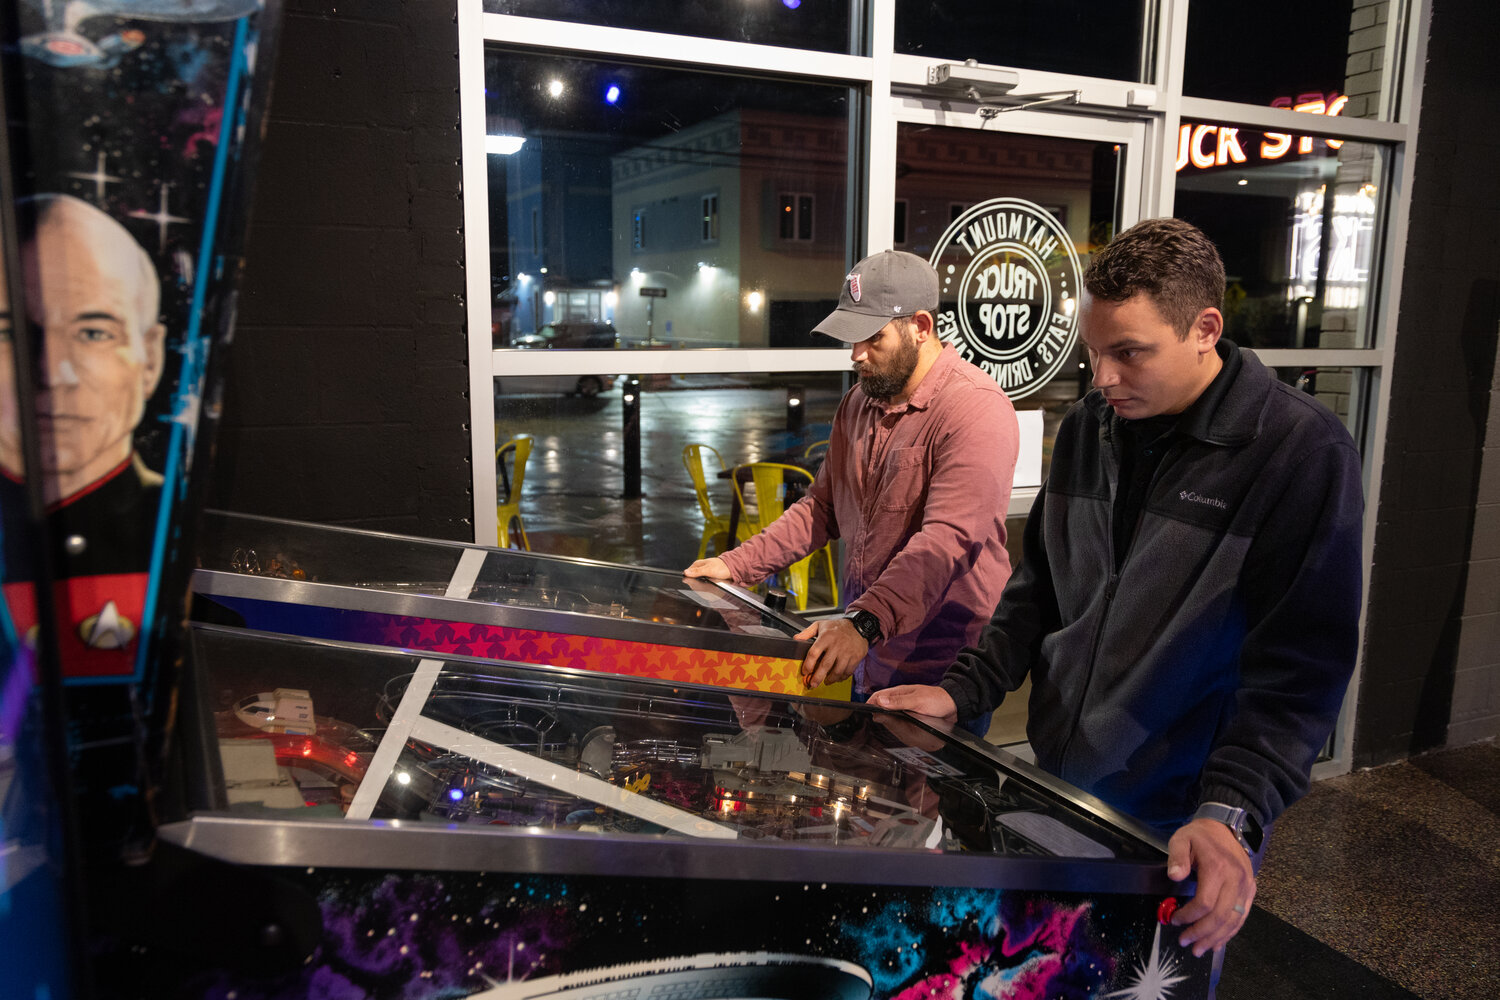 Jordan Finlayson, in the hat, and Shane Caulder play pinball at the soft opening of the Haymount Truck Stop.